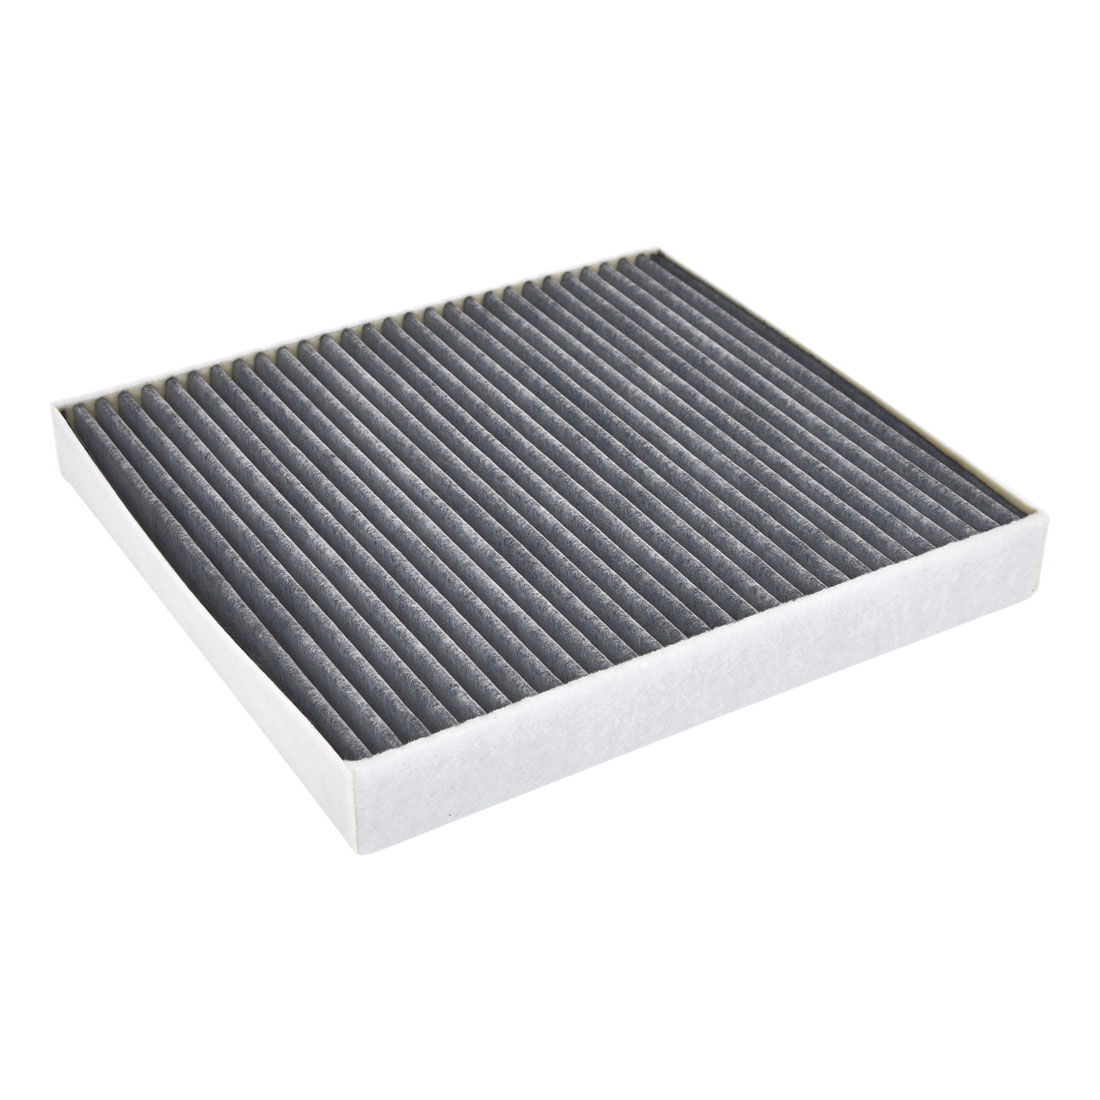 Bosch Carbon Activated Cabin Air Filter - R 2543, , scaau_hi-res